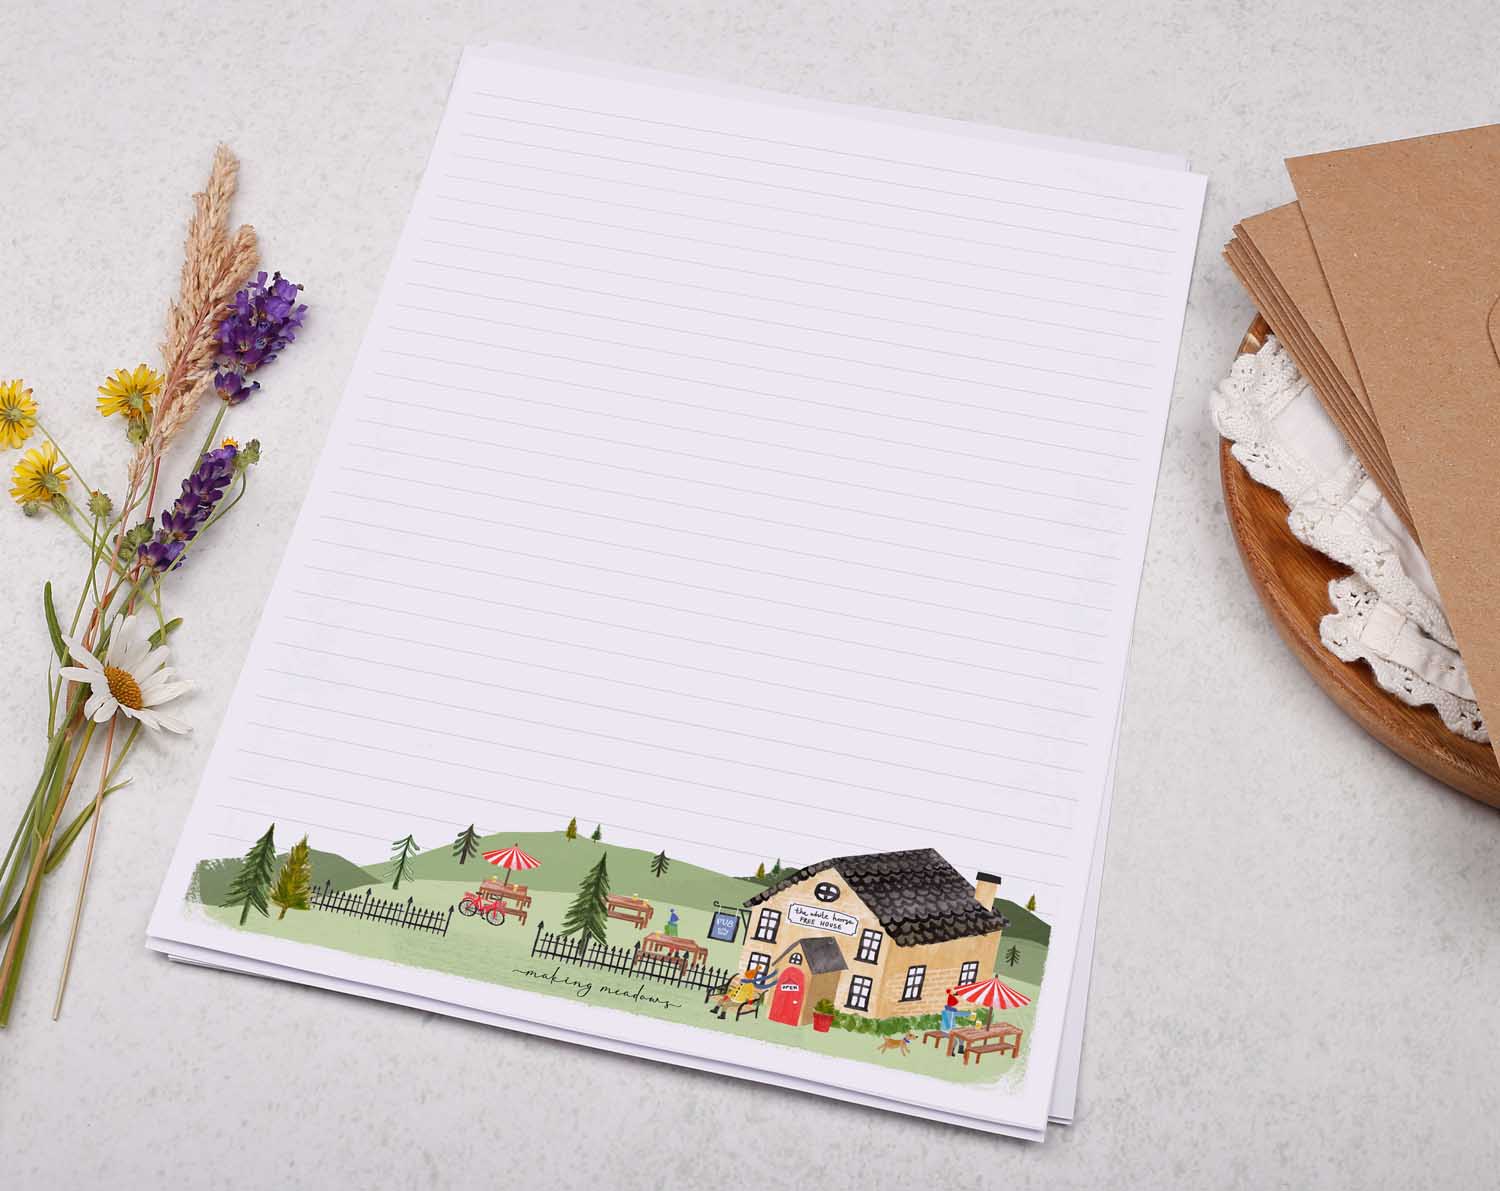 A4 letter writing paper sheets with a cute illustration of a countryside pub surrounded by rolling hills.